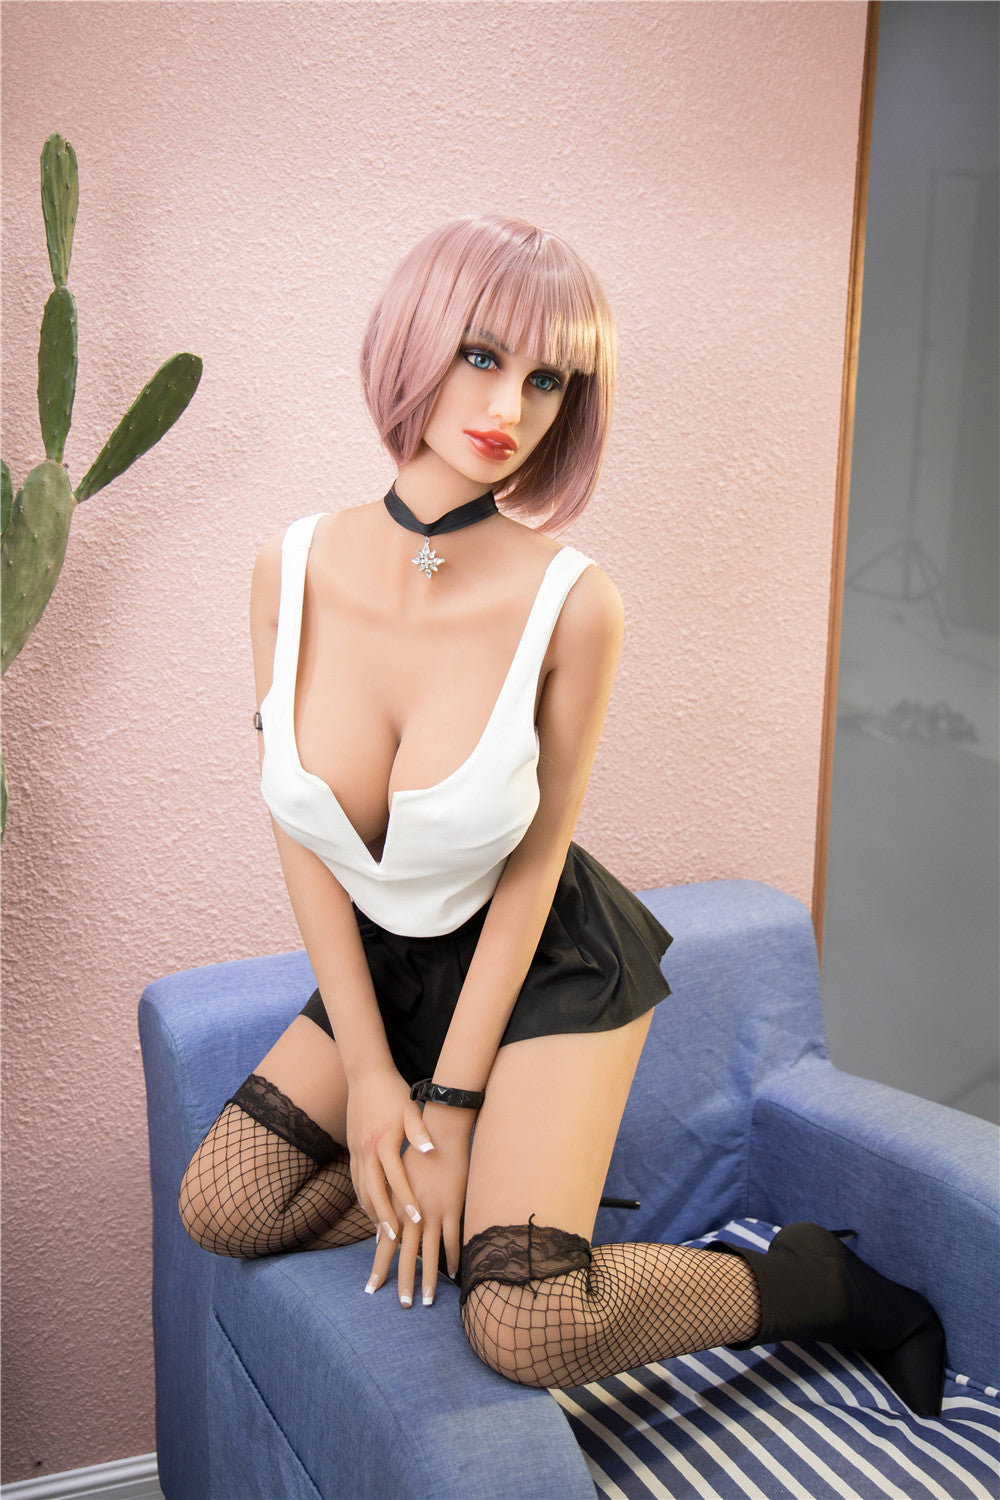 Quinn - Big Breasts TPE Real Sex Doll 5ft2 (158cm) - Sexindoll